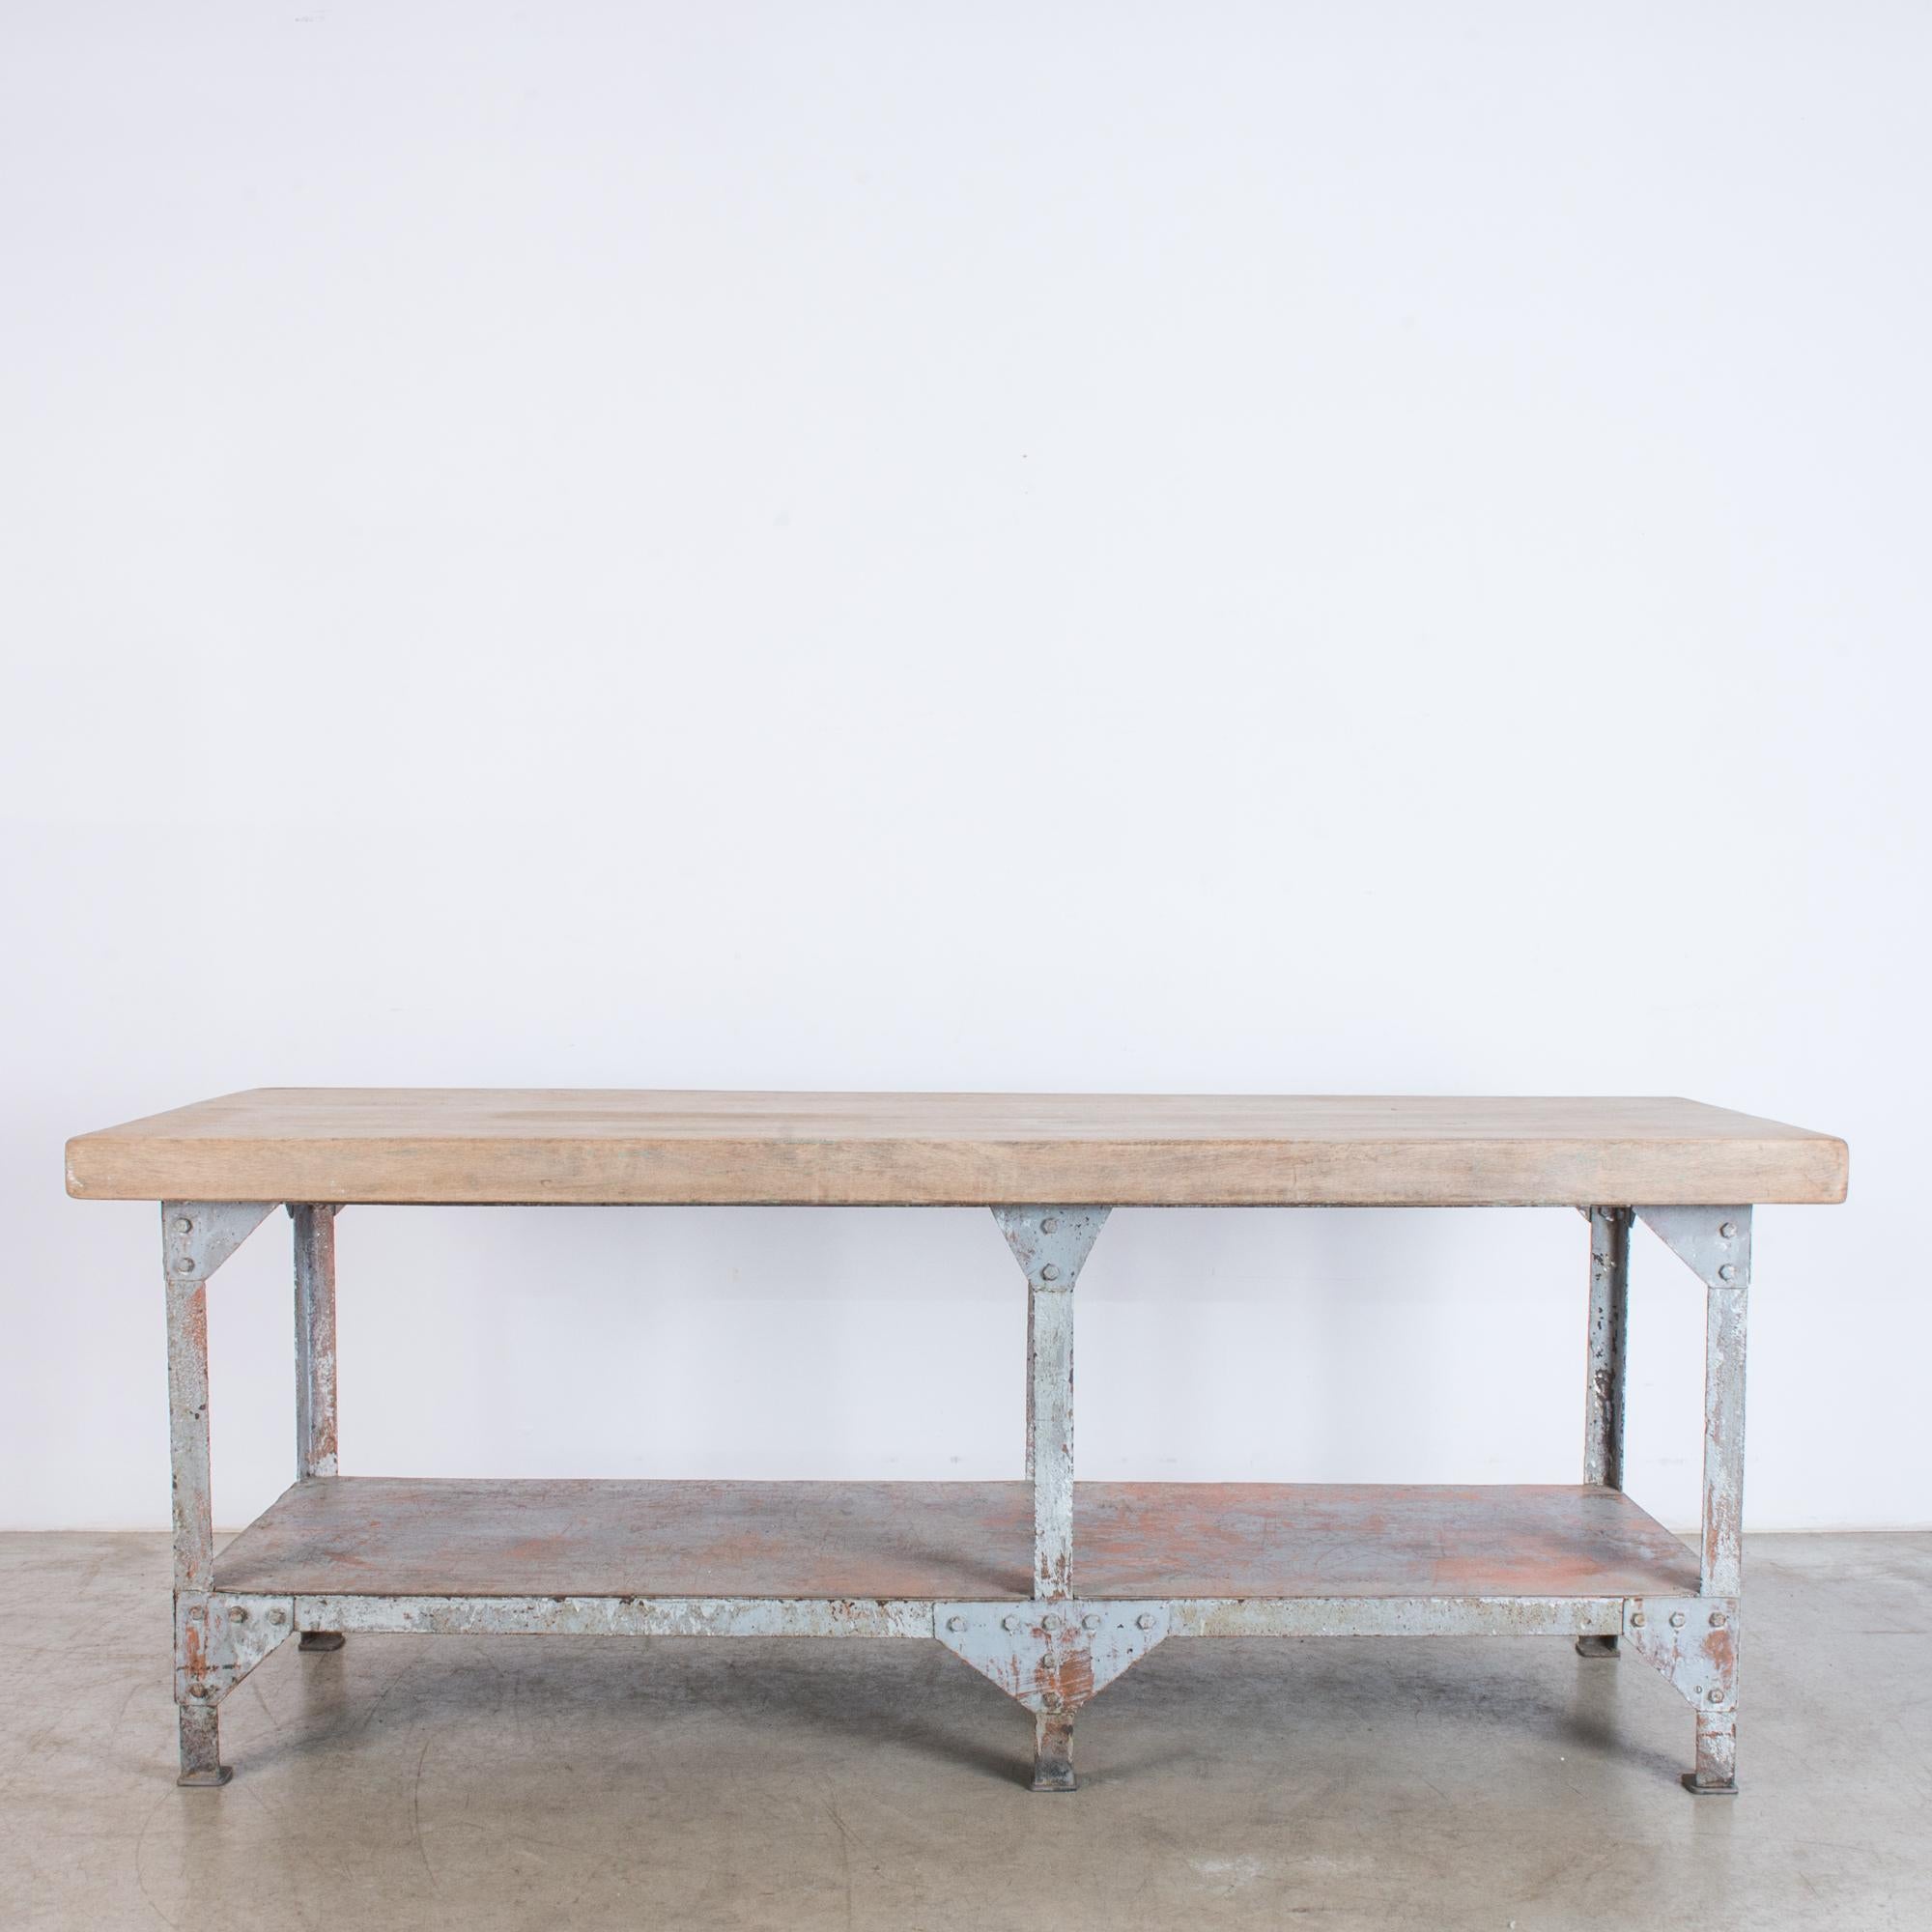 Bolted steel structure supports extremely thick top. Harmonious design of industry, a combination of simple forms in muted time worn neutral colour palette. Cerused oak contains traces of original pigment, restored in our studio, matched to the